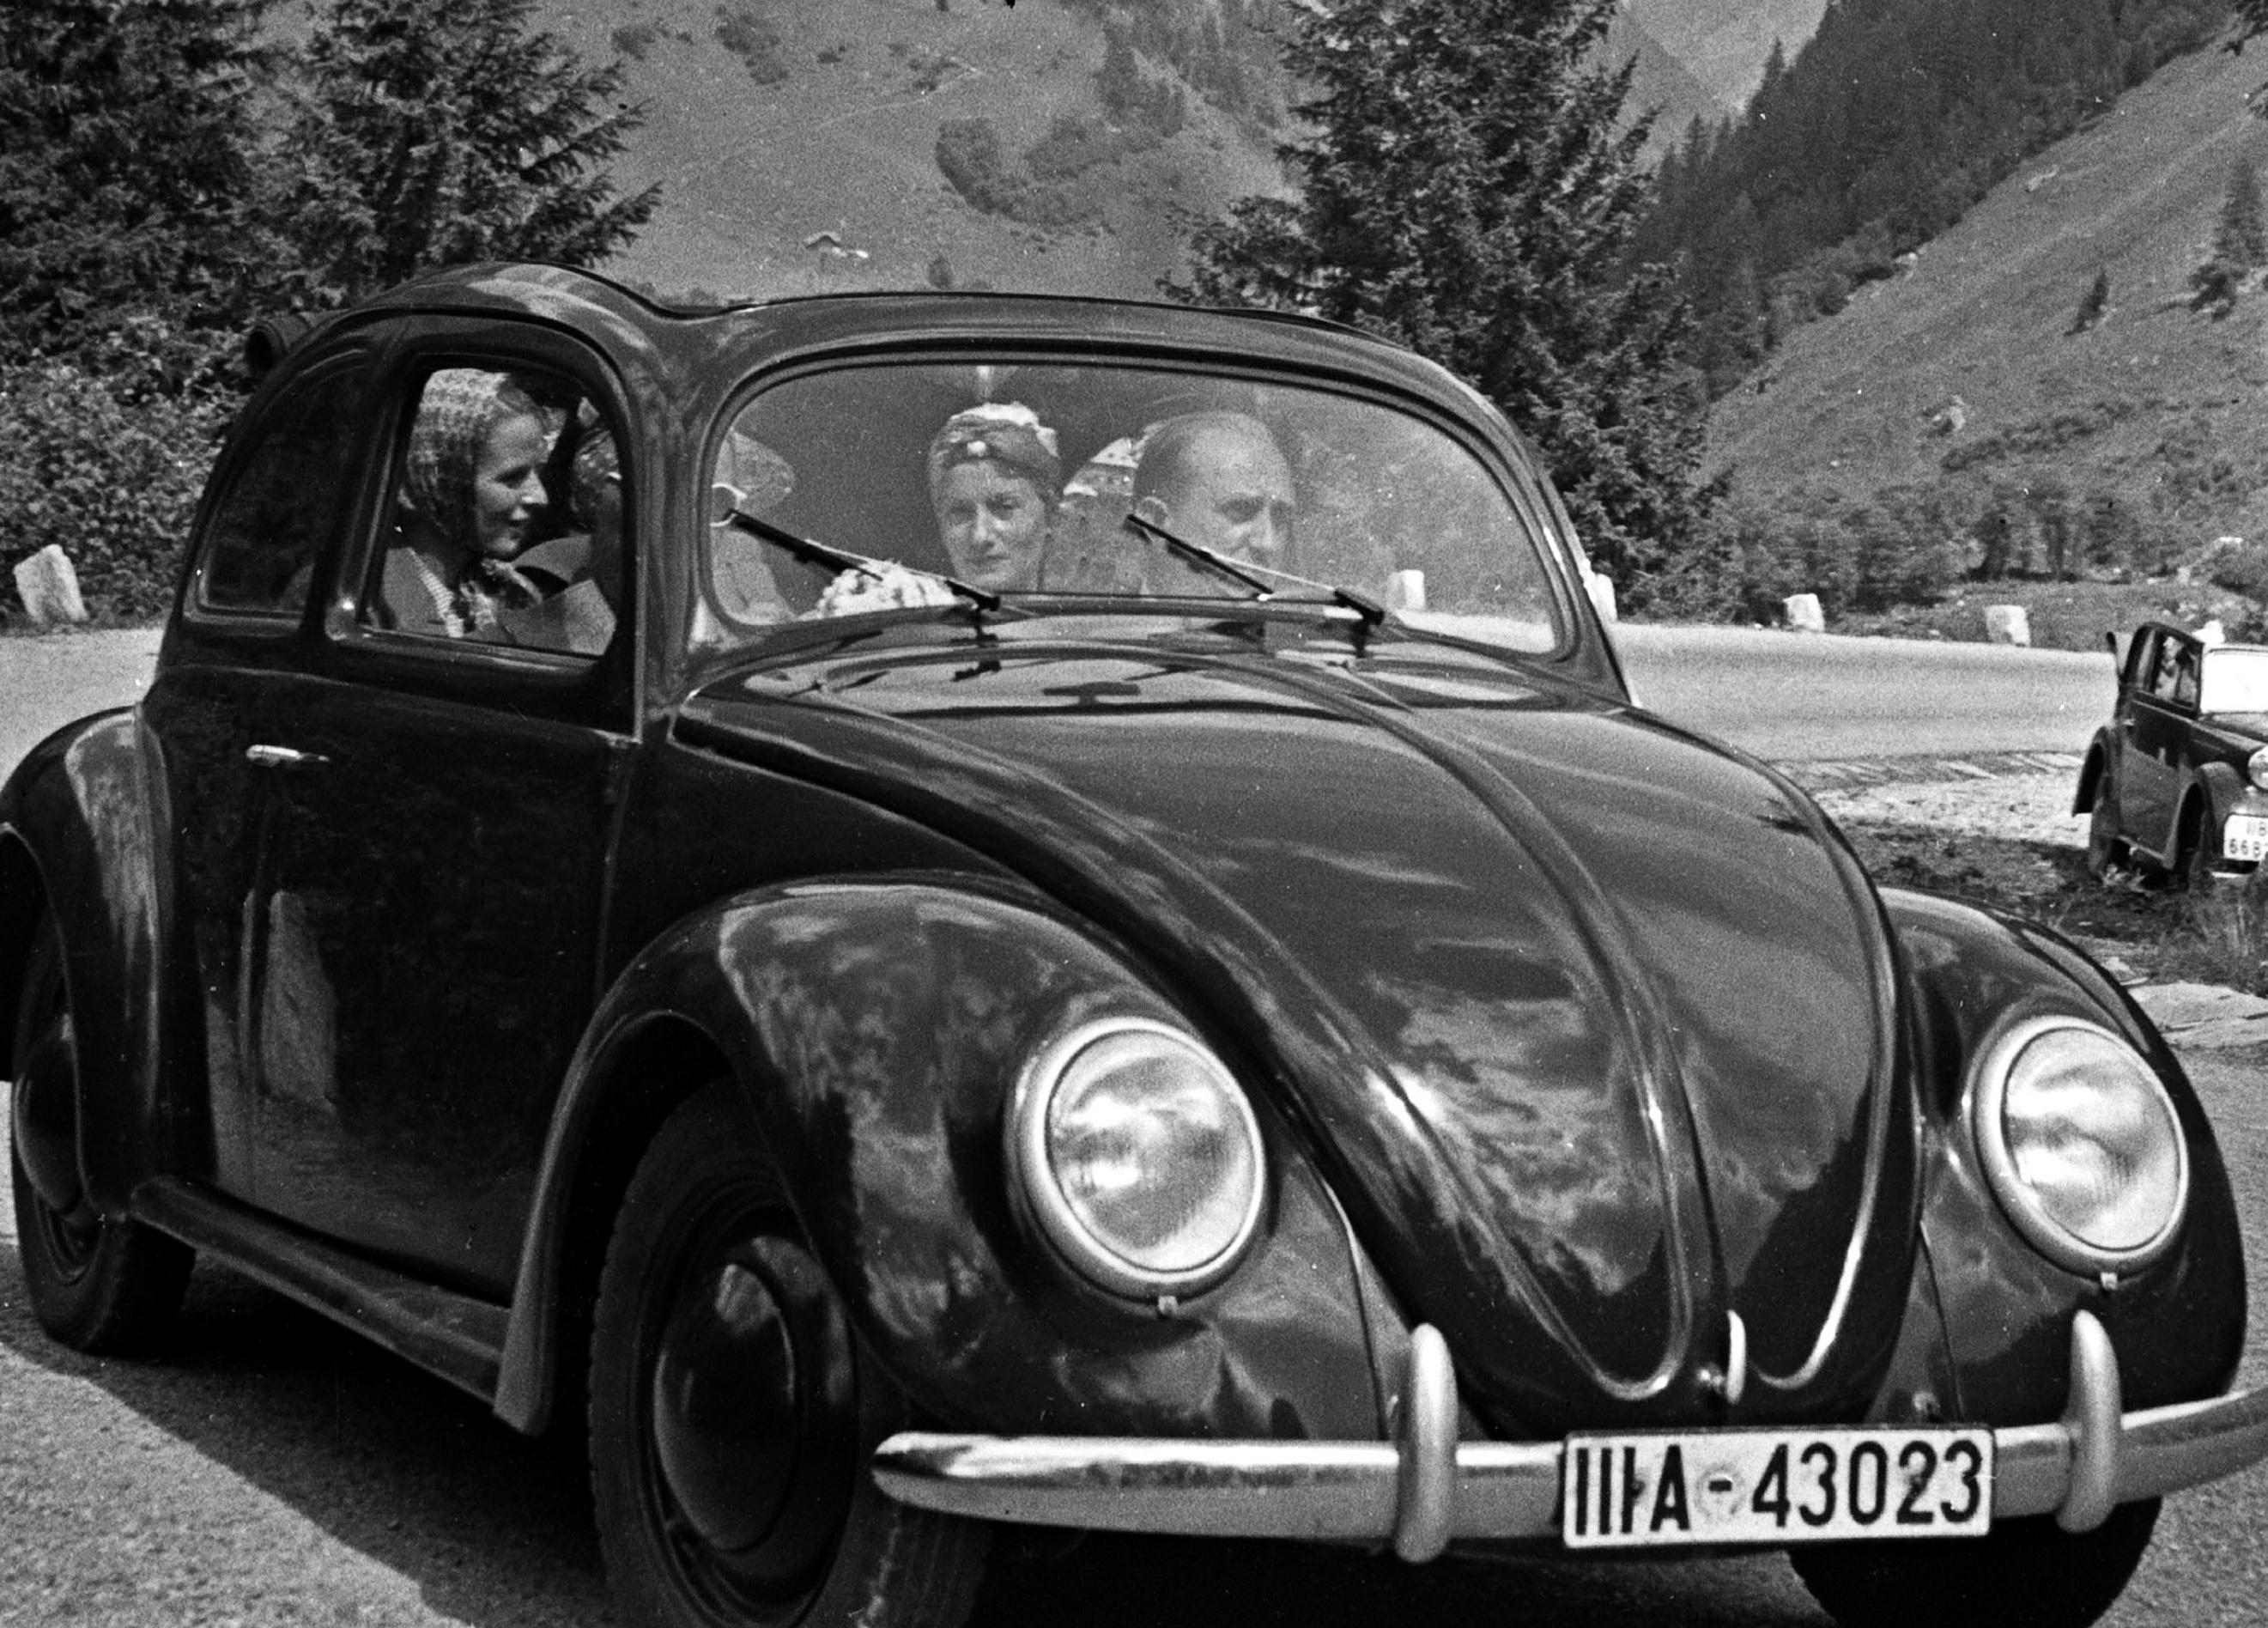 Exploring the countryside in a Volkswagen beetle, Germany 1939 Printed Later - Photograph by Karl Heinrich Lämmel